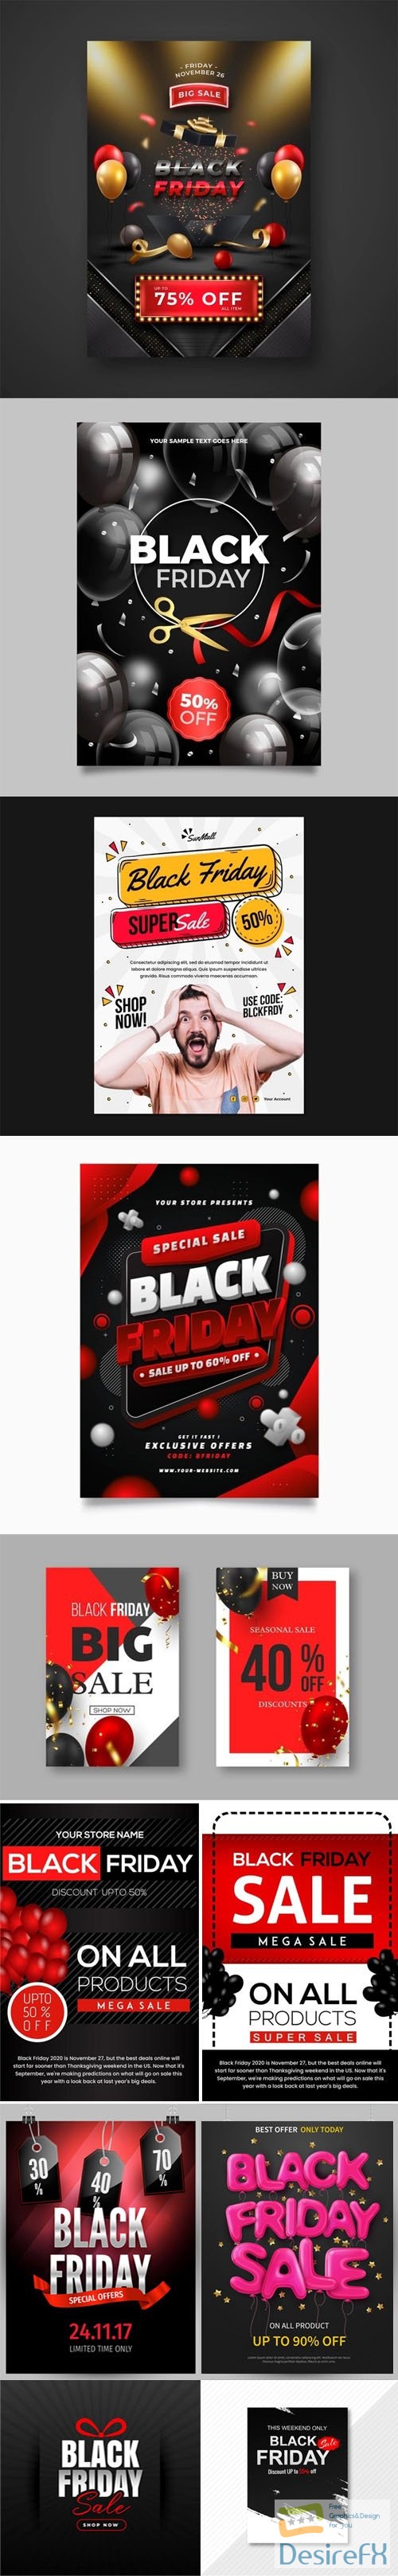 12 Black Friday Posters Vector Design Templates